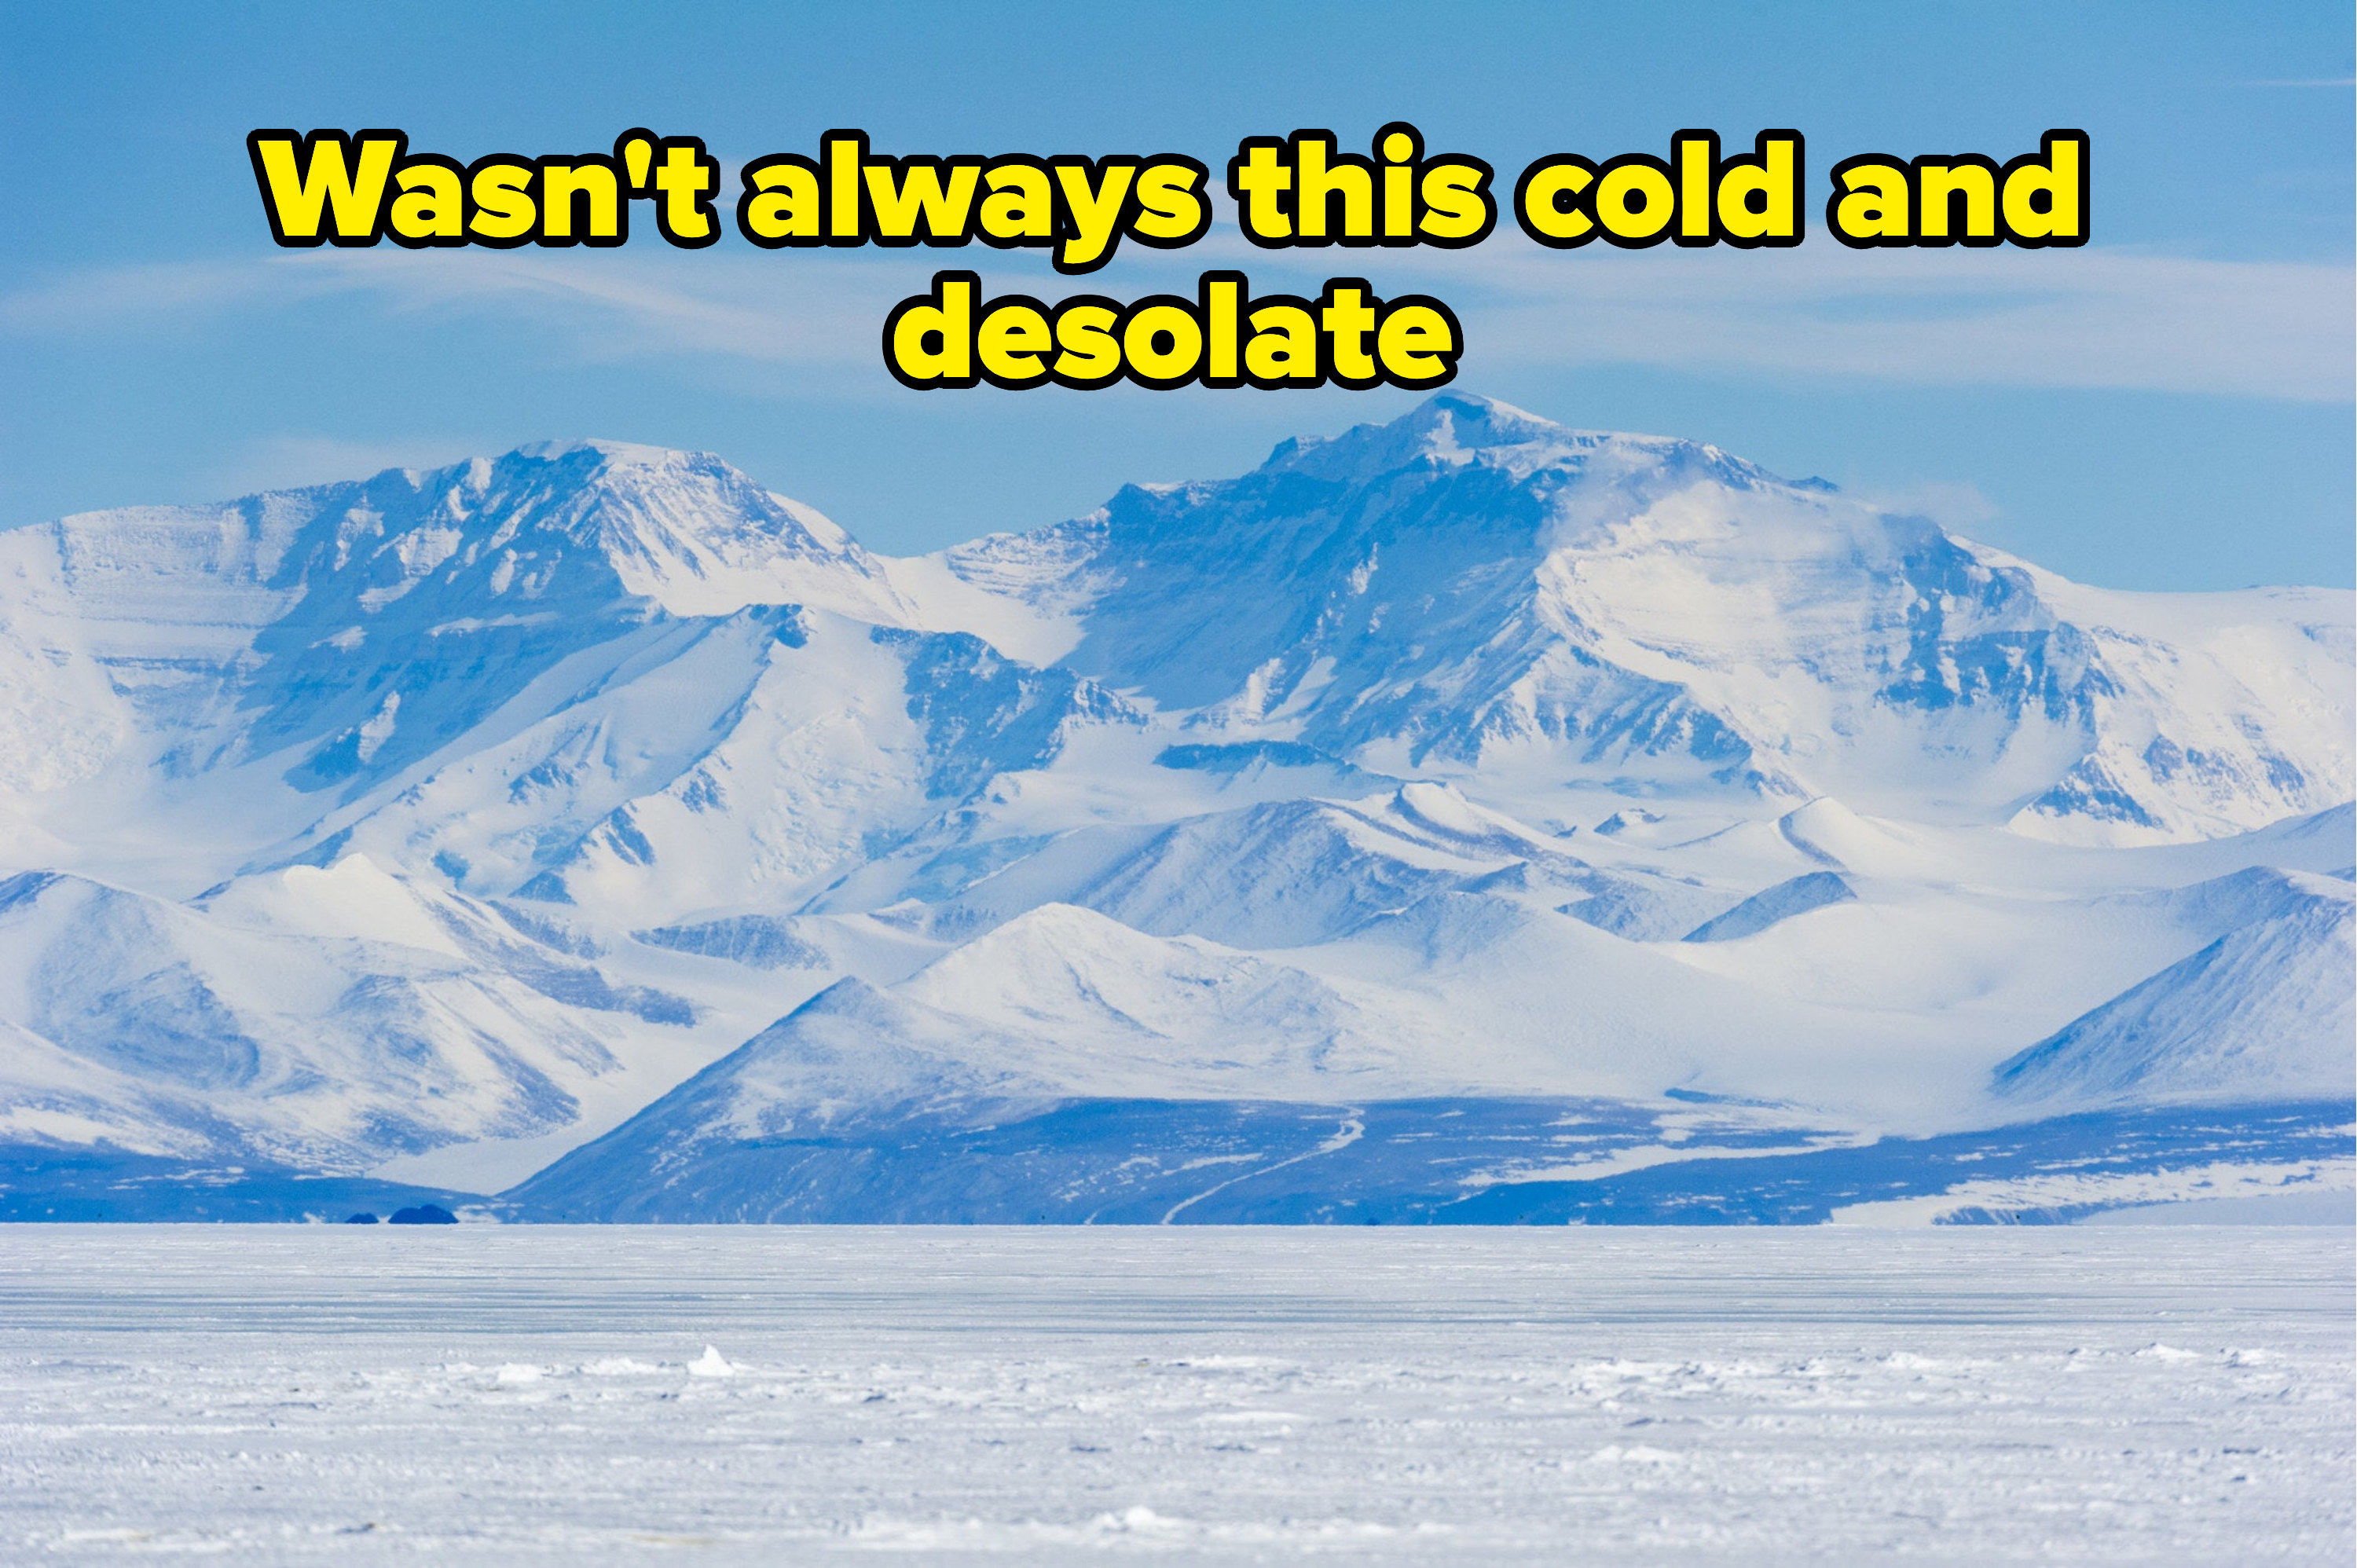 Antarctica with caption &quot;Wasn&#x27;t always this cold and desolate&quot;